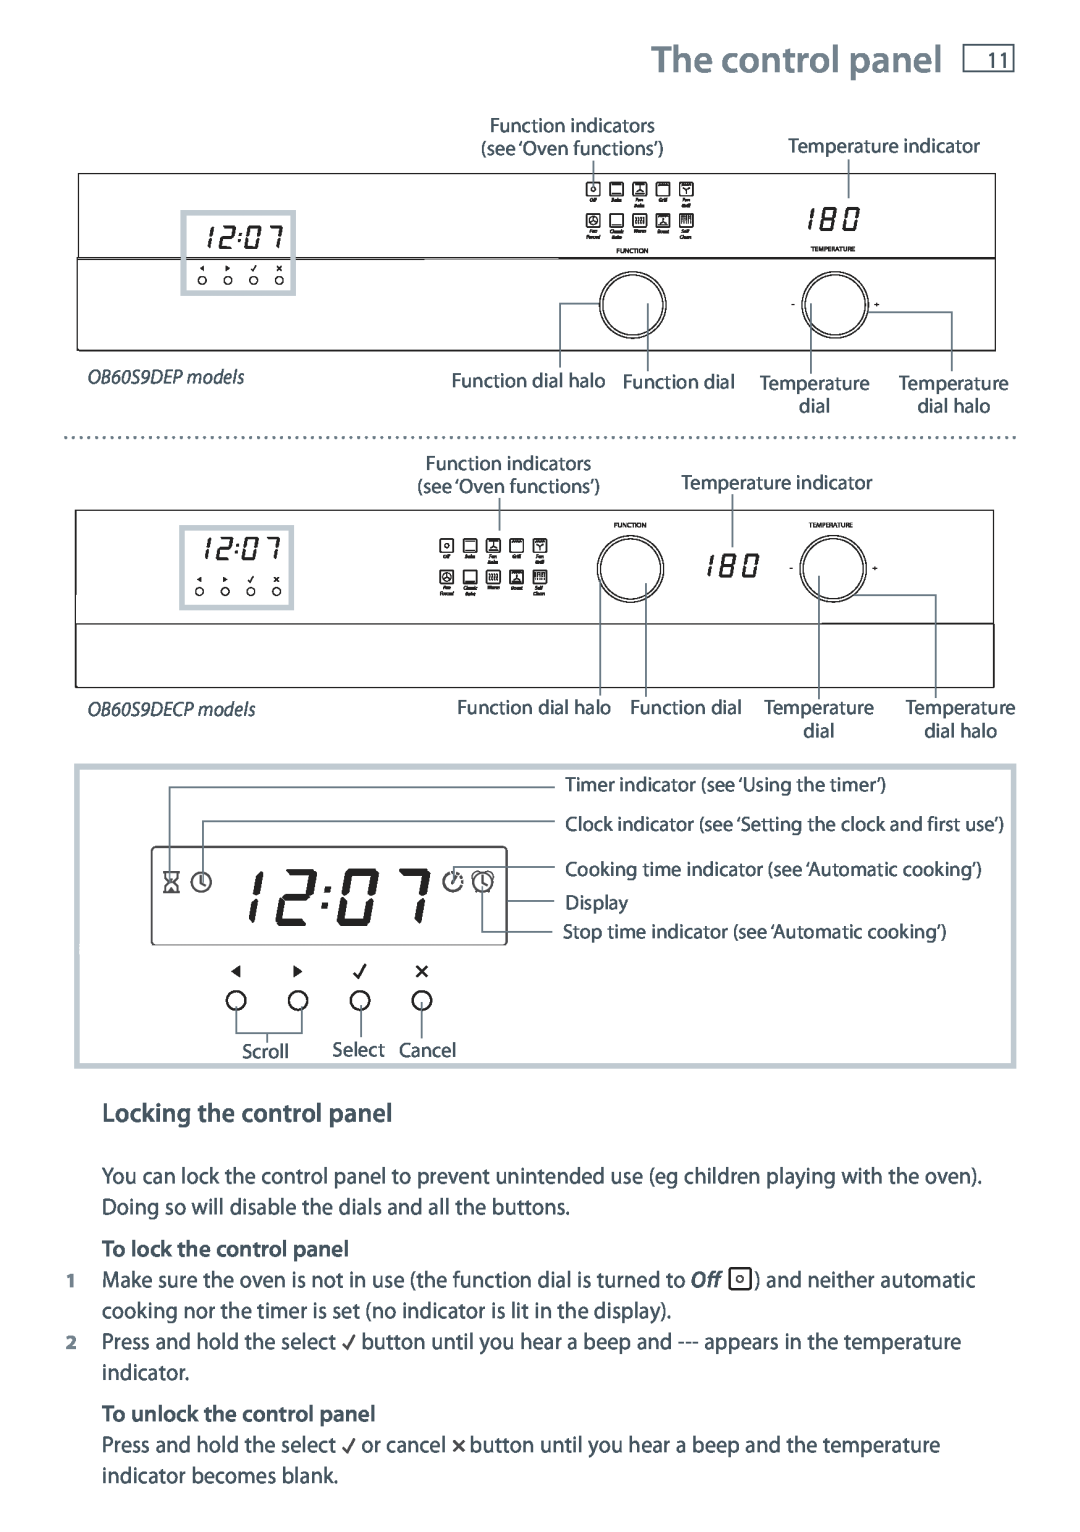 Fisher & Paykel OB60S9DECP, OB60S9DEP installation instructions The control panel, Locking the control panel 